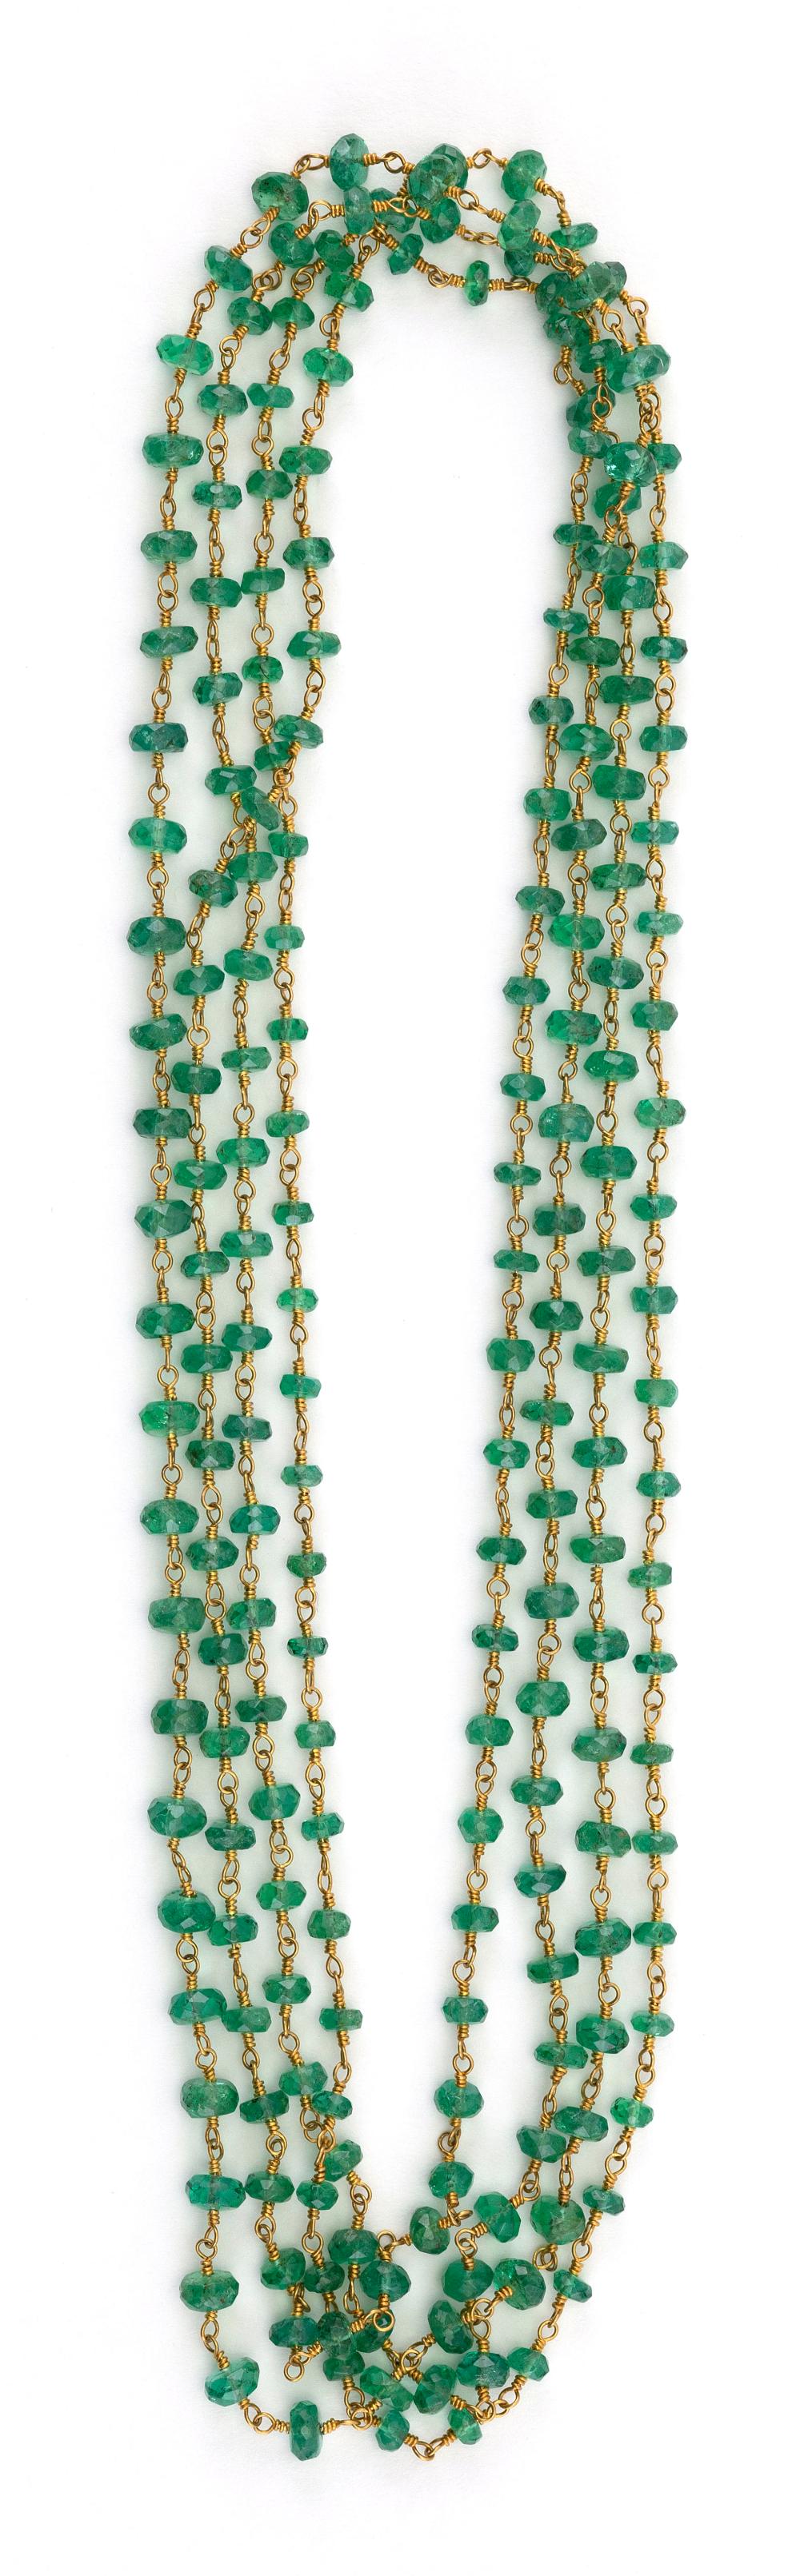 GOLD AND EMERALD BEAD NECKLACE 34cf43